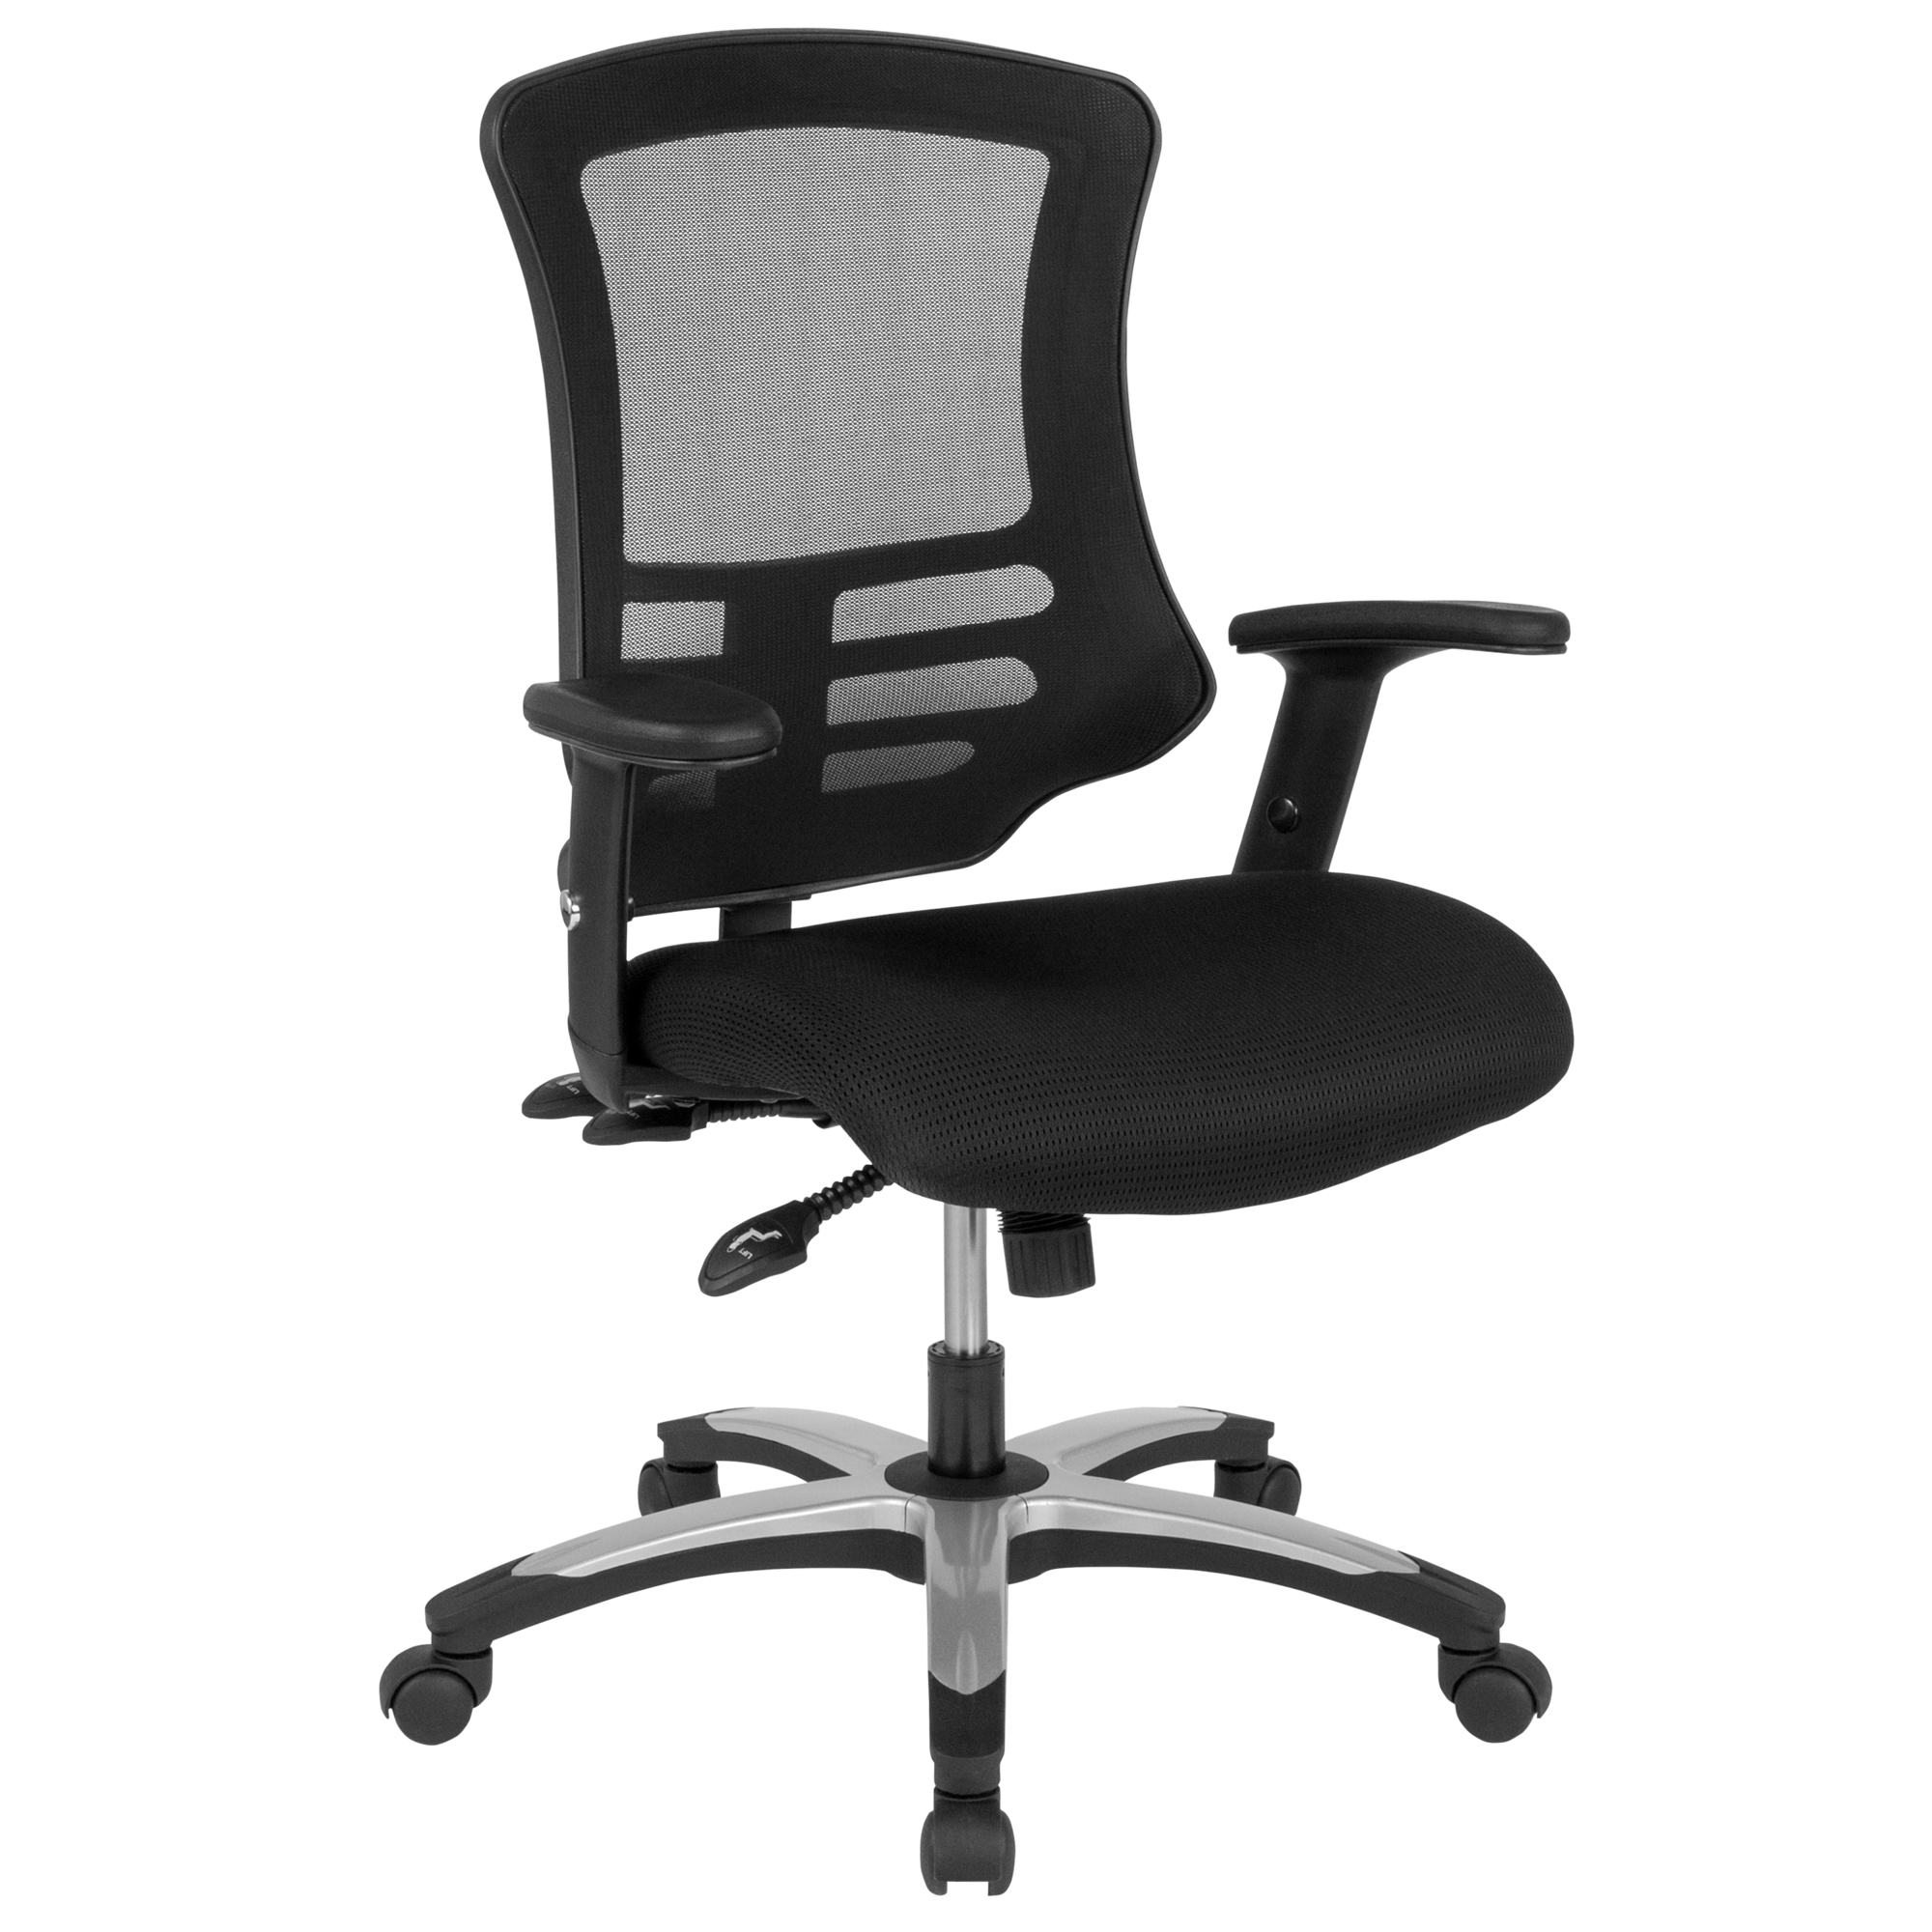 Flash Furniture, High Back Black Multifunction Swivel Office Chair, Primary Color Black, Included (qty.) 1, Model BLLB8817